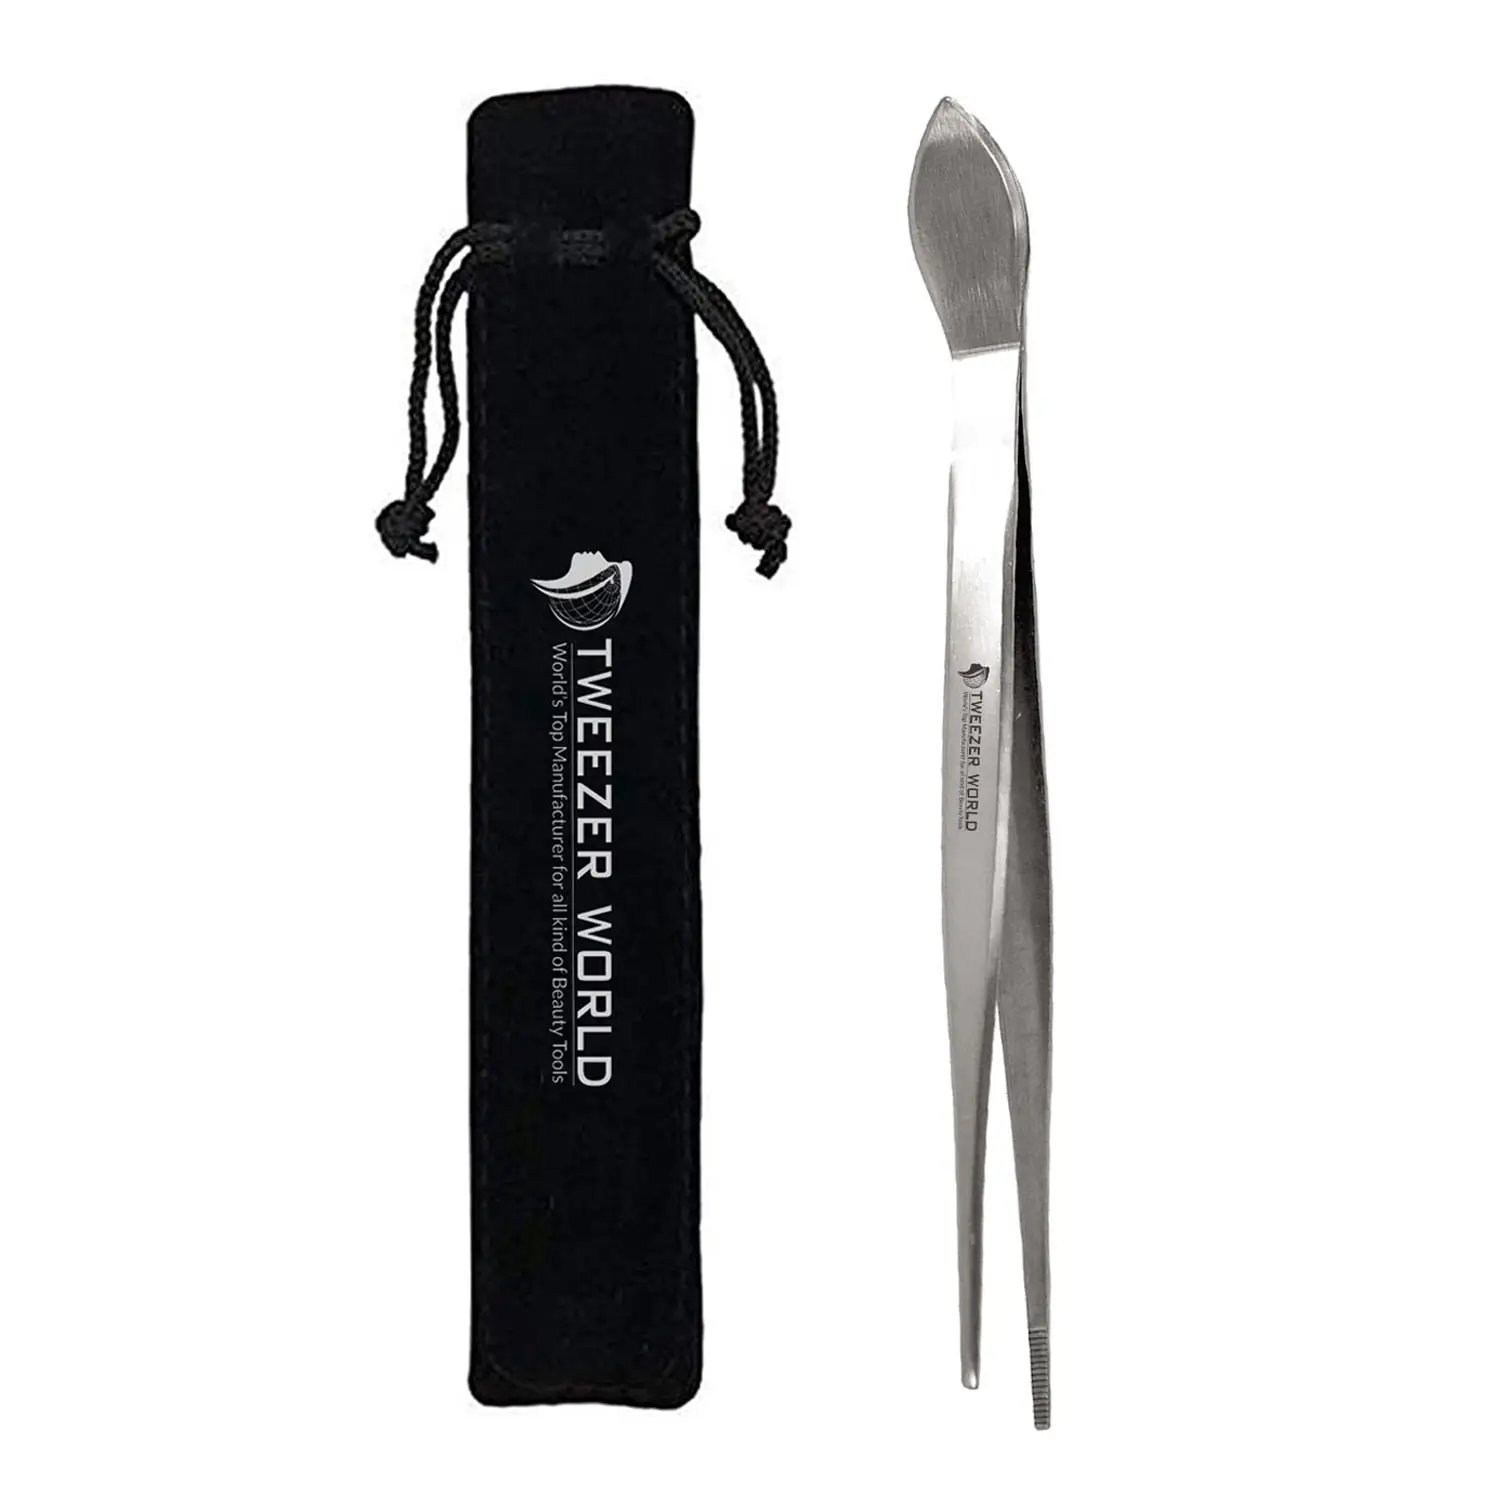 Bonsai & Gardening Tools Mix-Function with Tweezers and Spatula Stainless Steel Tweezers for Aquarium